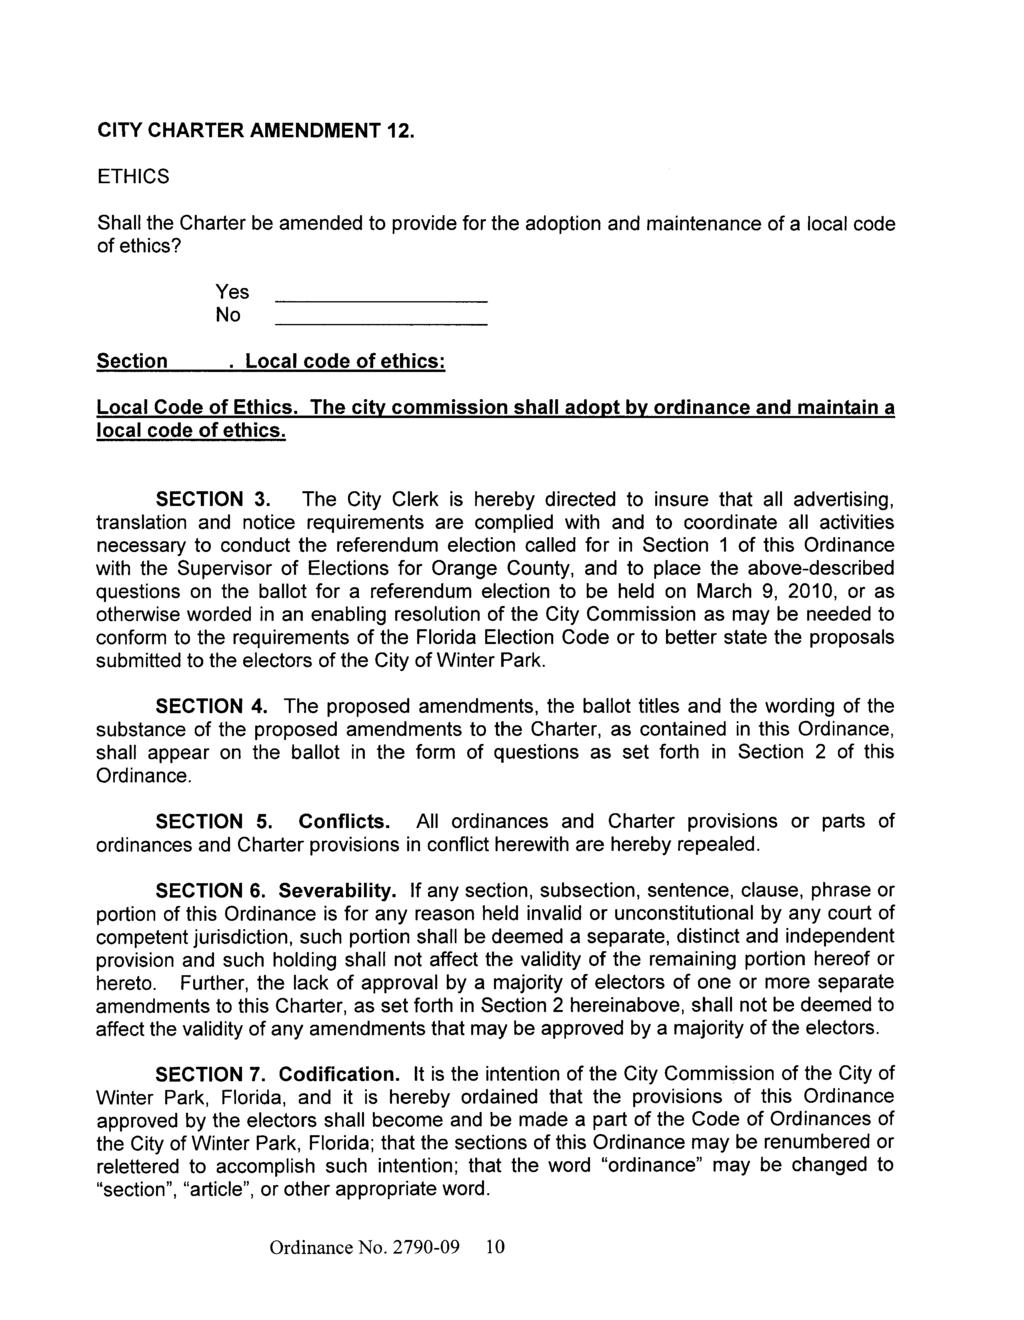 CITY CHARTER AMENDMENT 12 ETHICS Shall the Charter be amended to provide for the adoption of ethics and maintenance of a local code Section Local code of ethics Local Code of Ethics The city